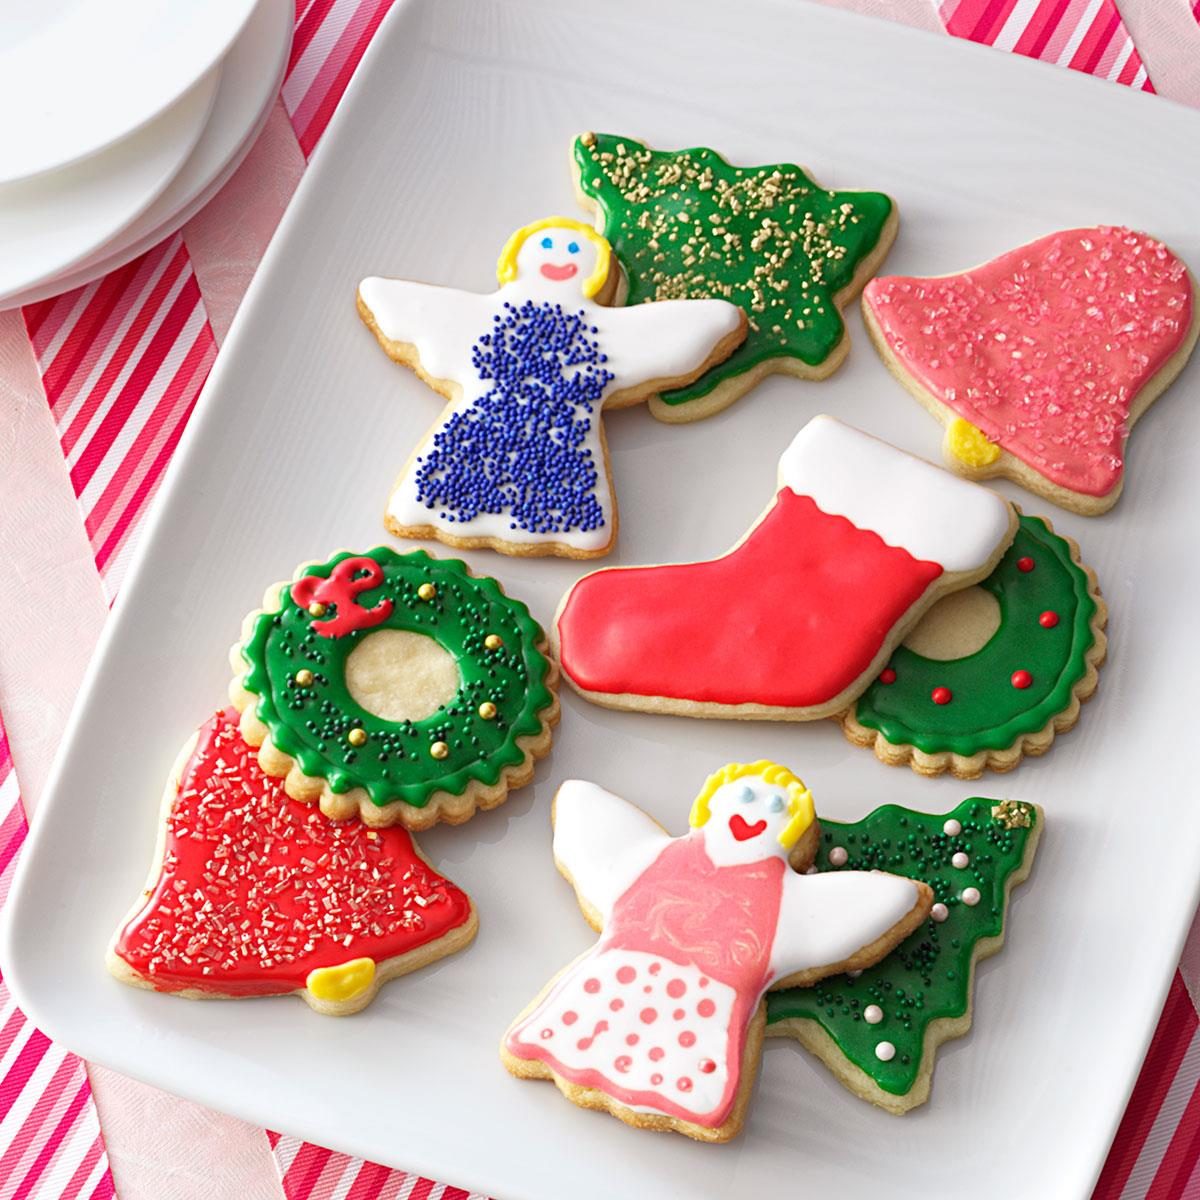 Decorated Sugar Cookie Cutouts